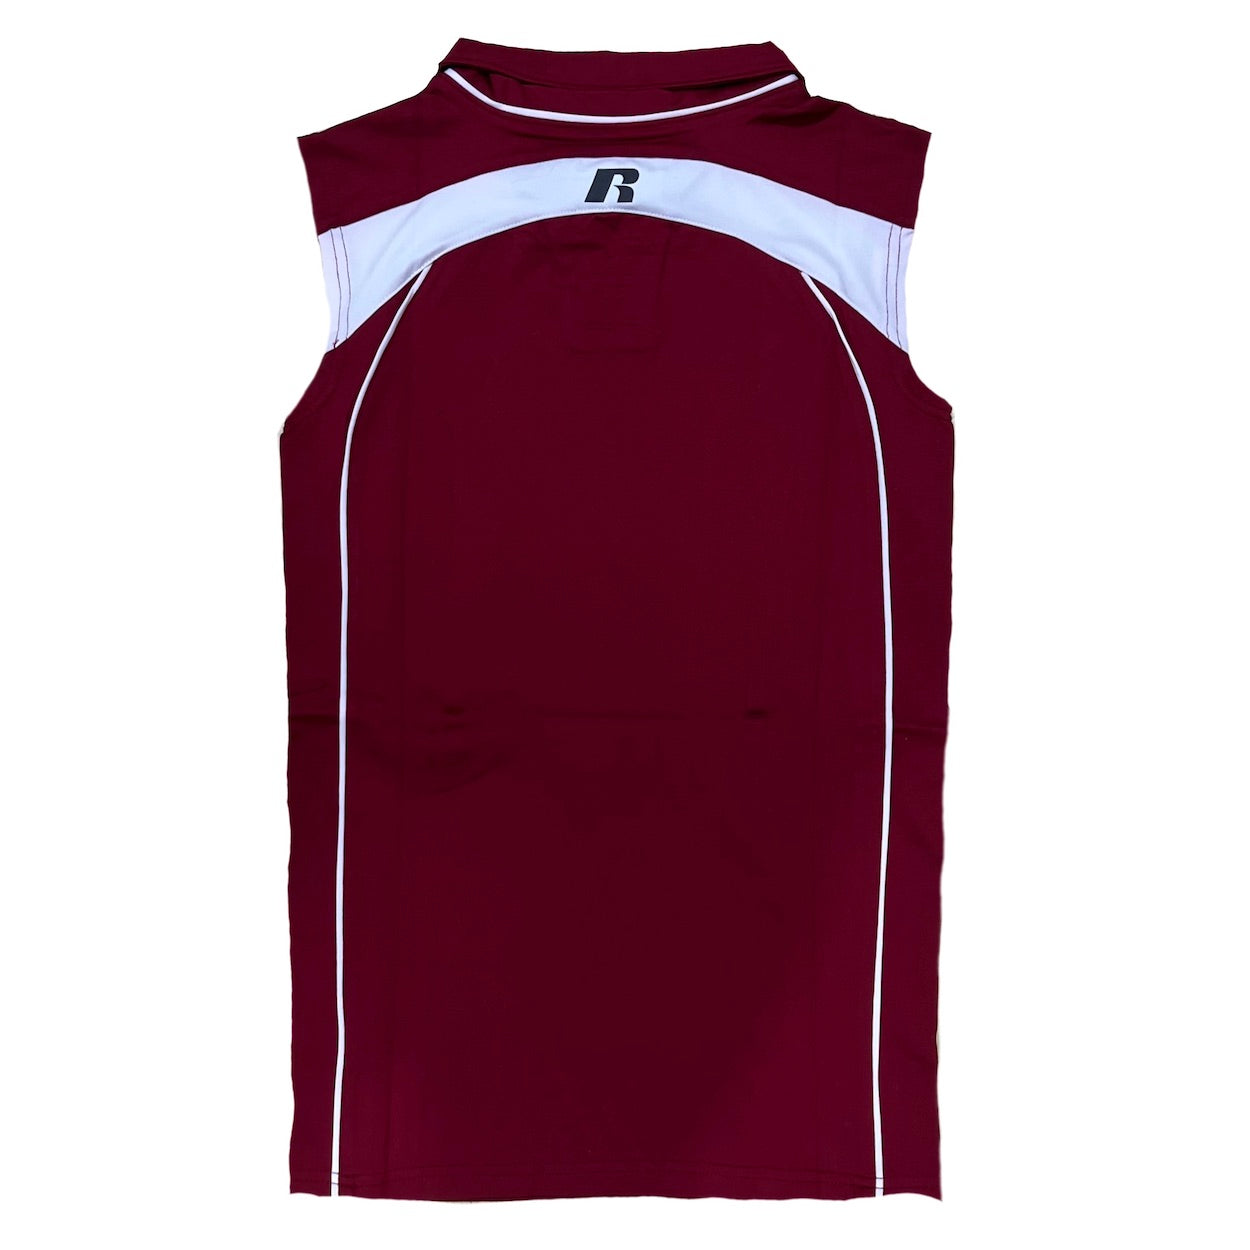 Women's Fitted Sports Top